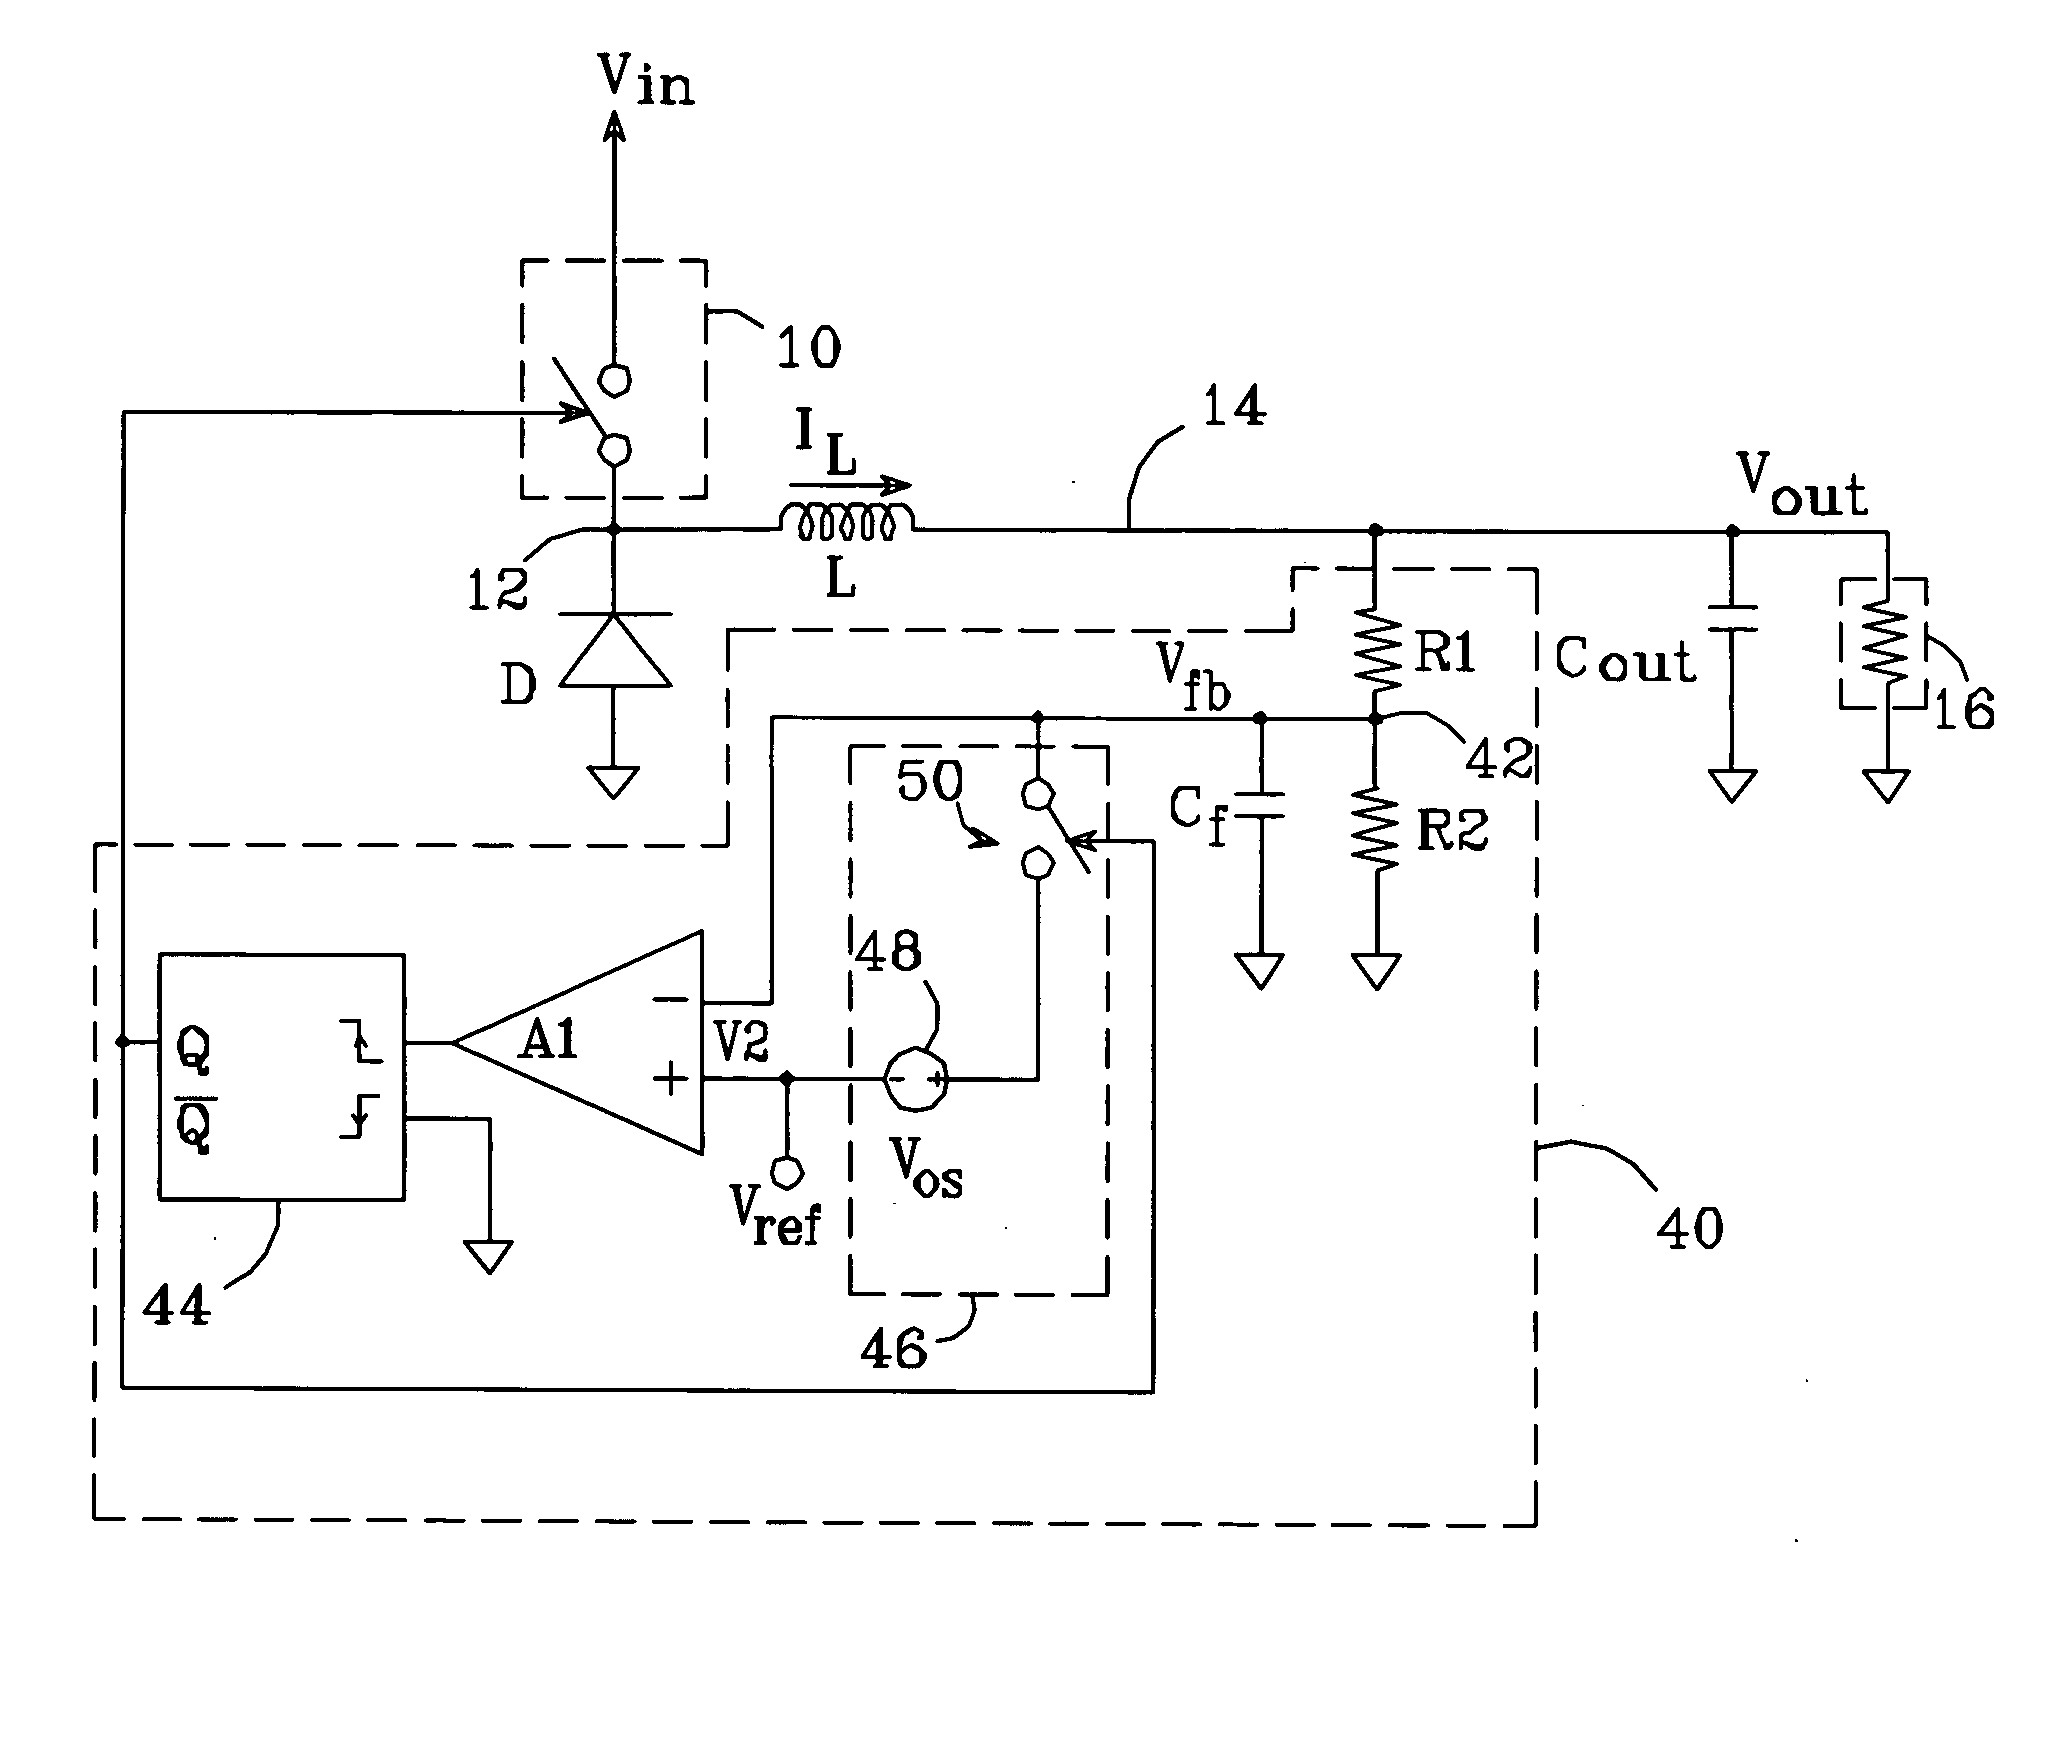 Switched noise filter circuit for a dc-dc converter